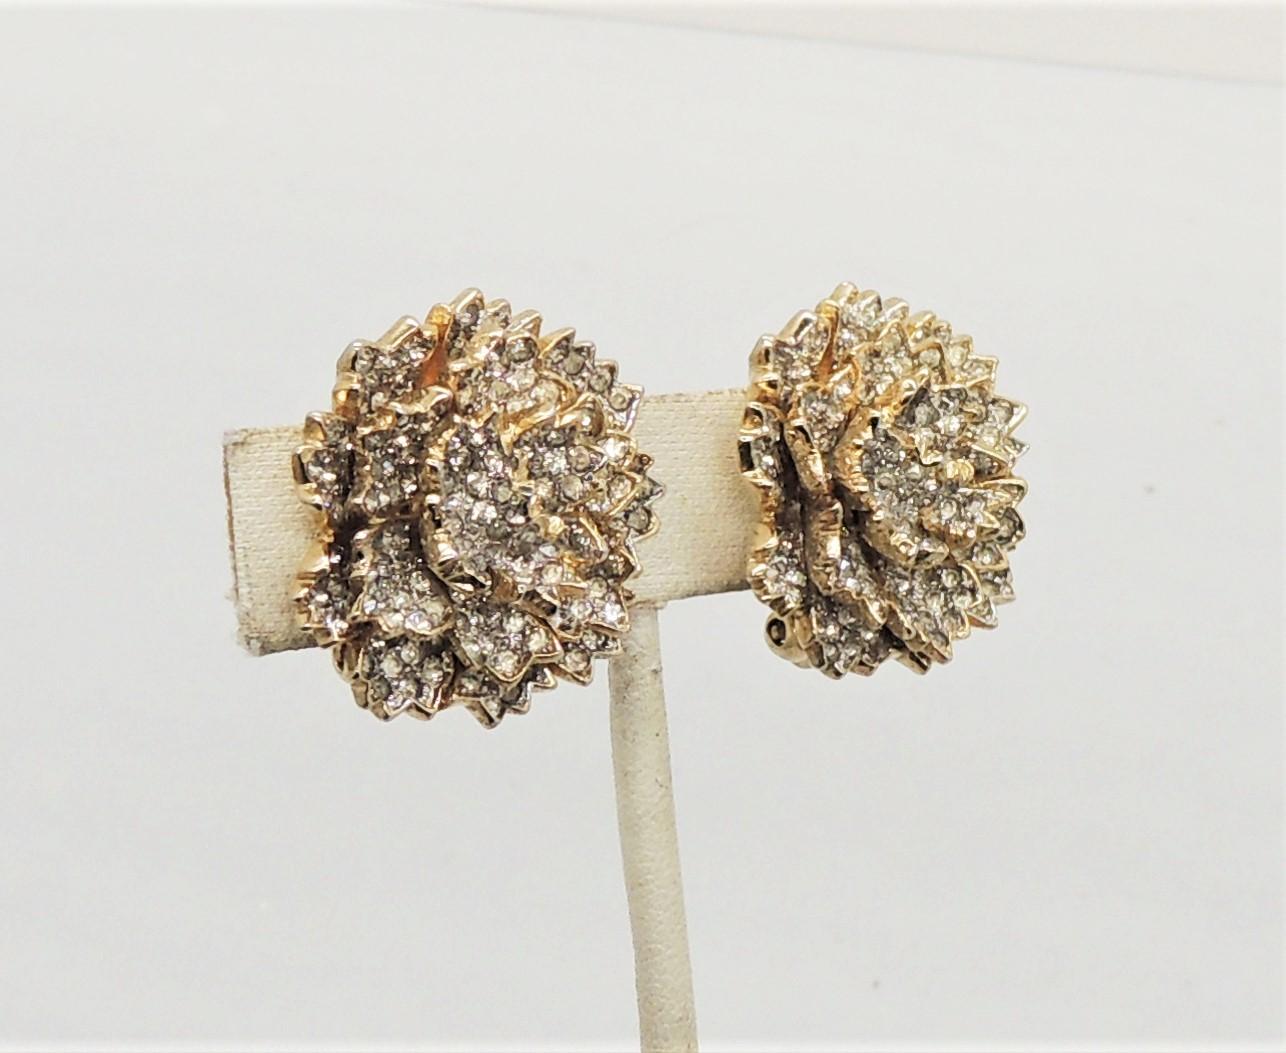 1950s goldtone pave clear rhinestone 3d flower clip earrings. Marked 